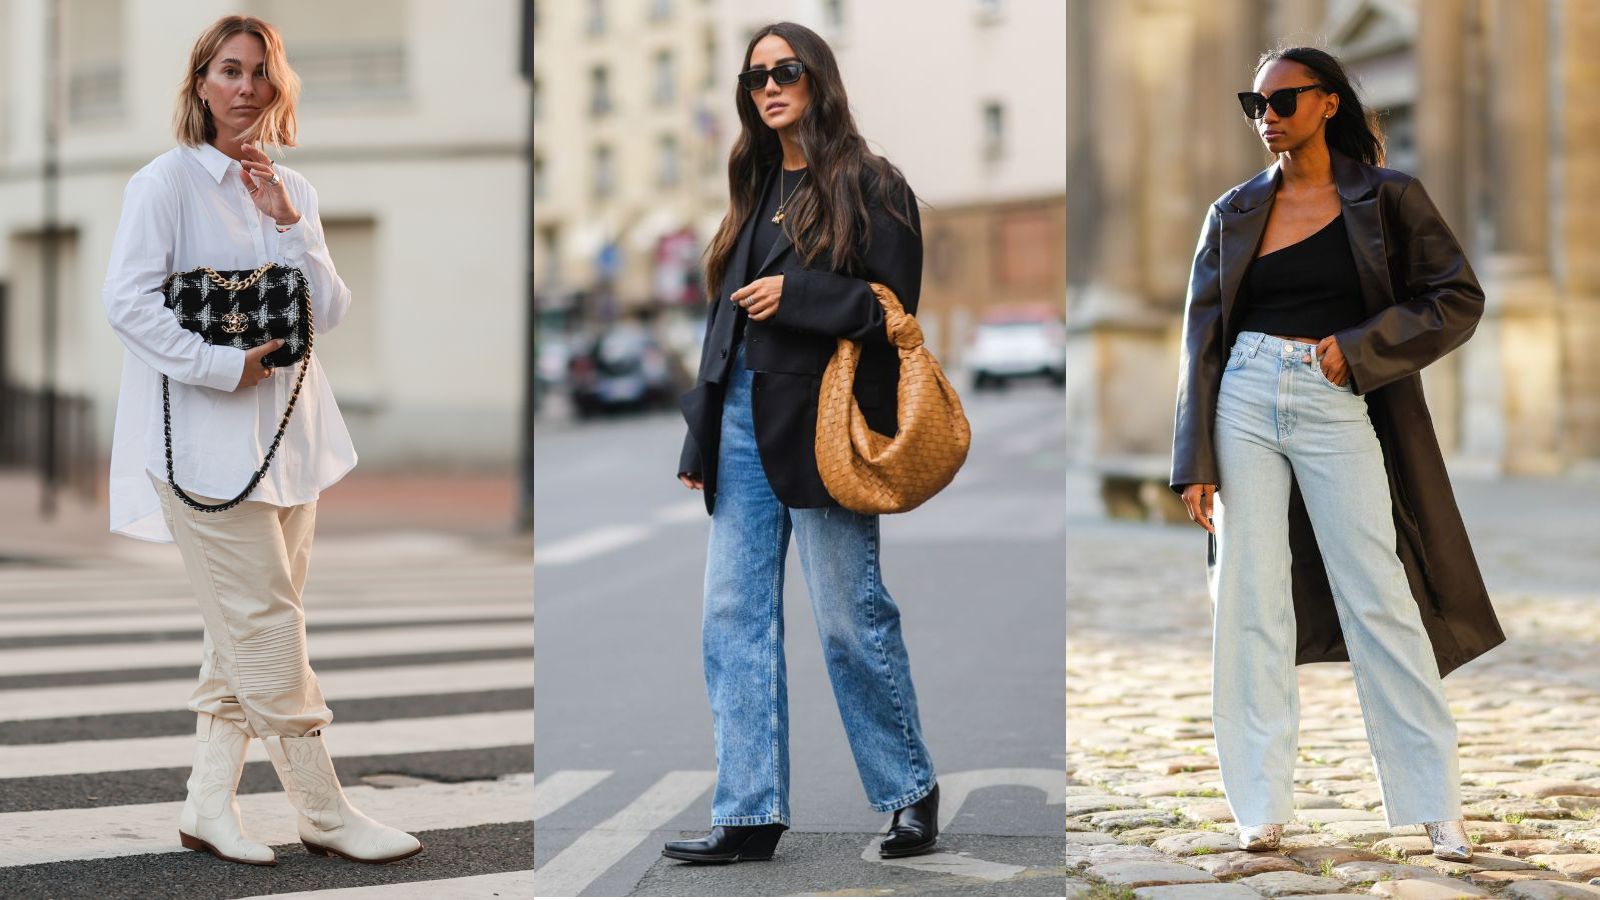 How To Wear Cowboy Boots With Jeans Female?